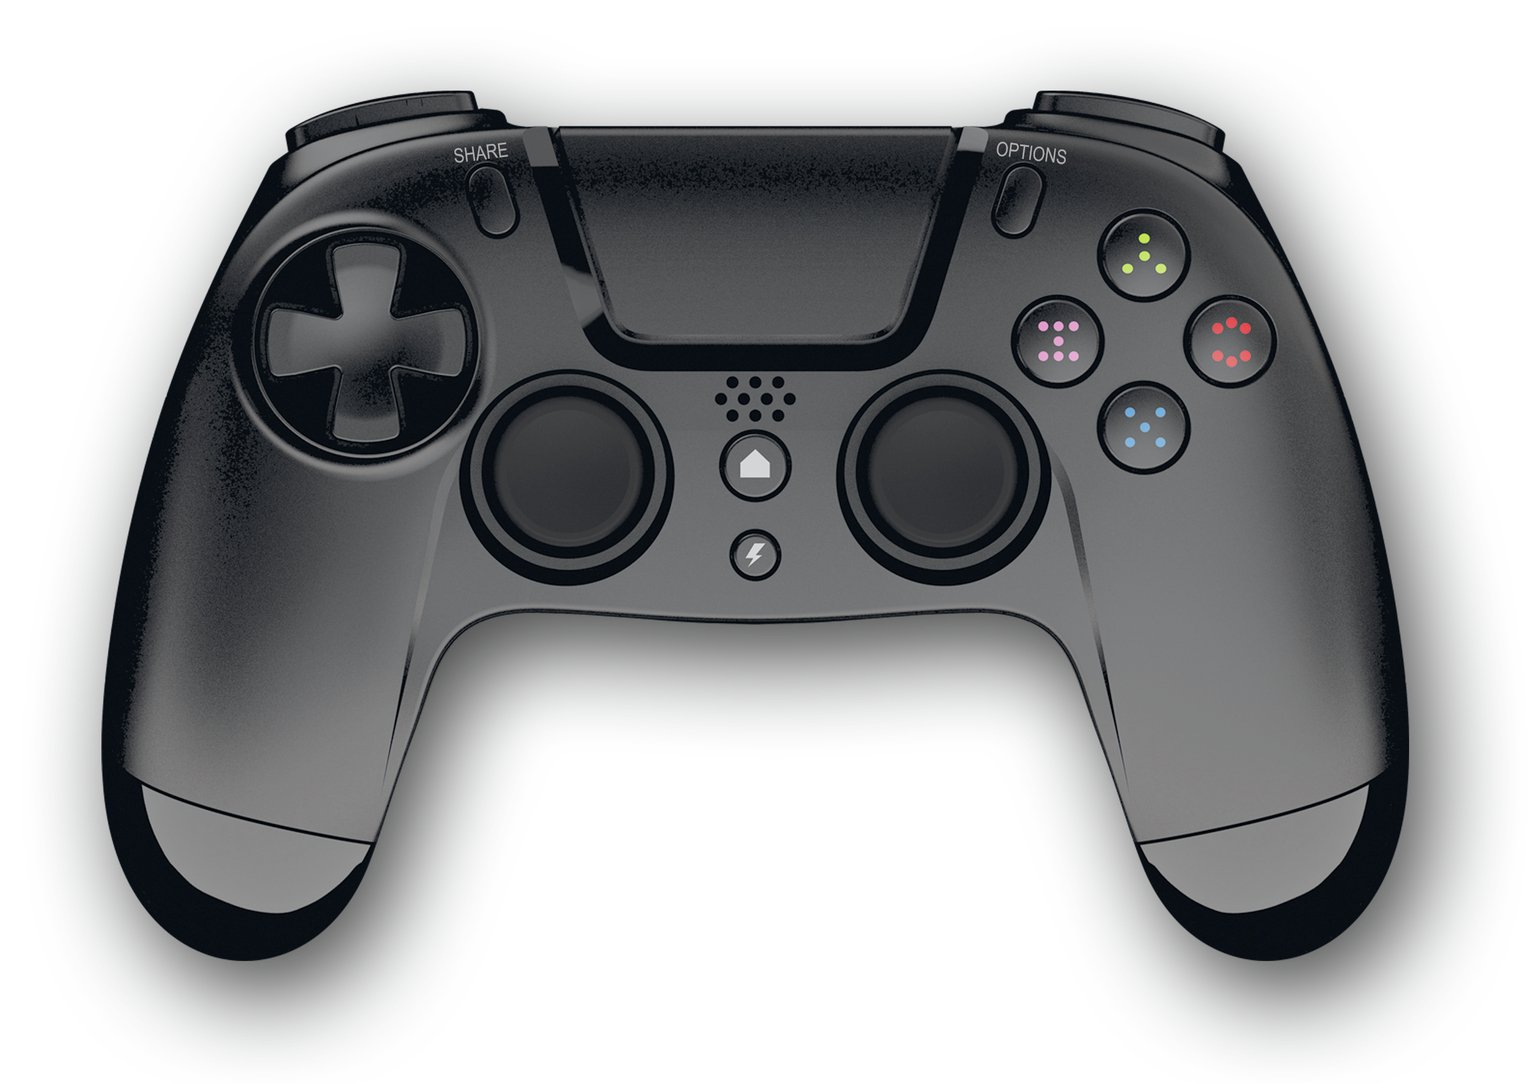 gioteck ps4 controller